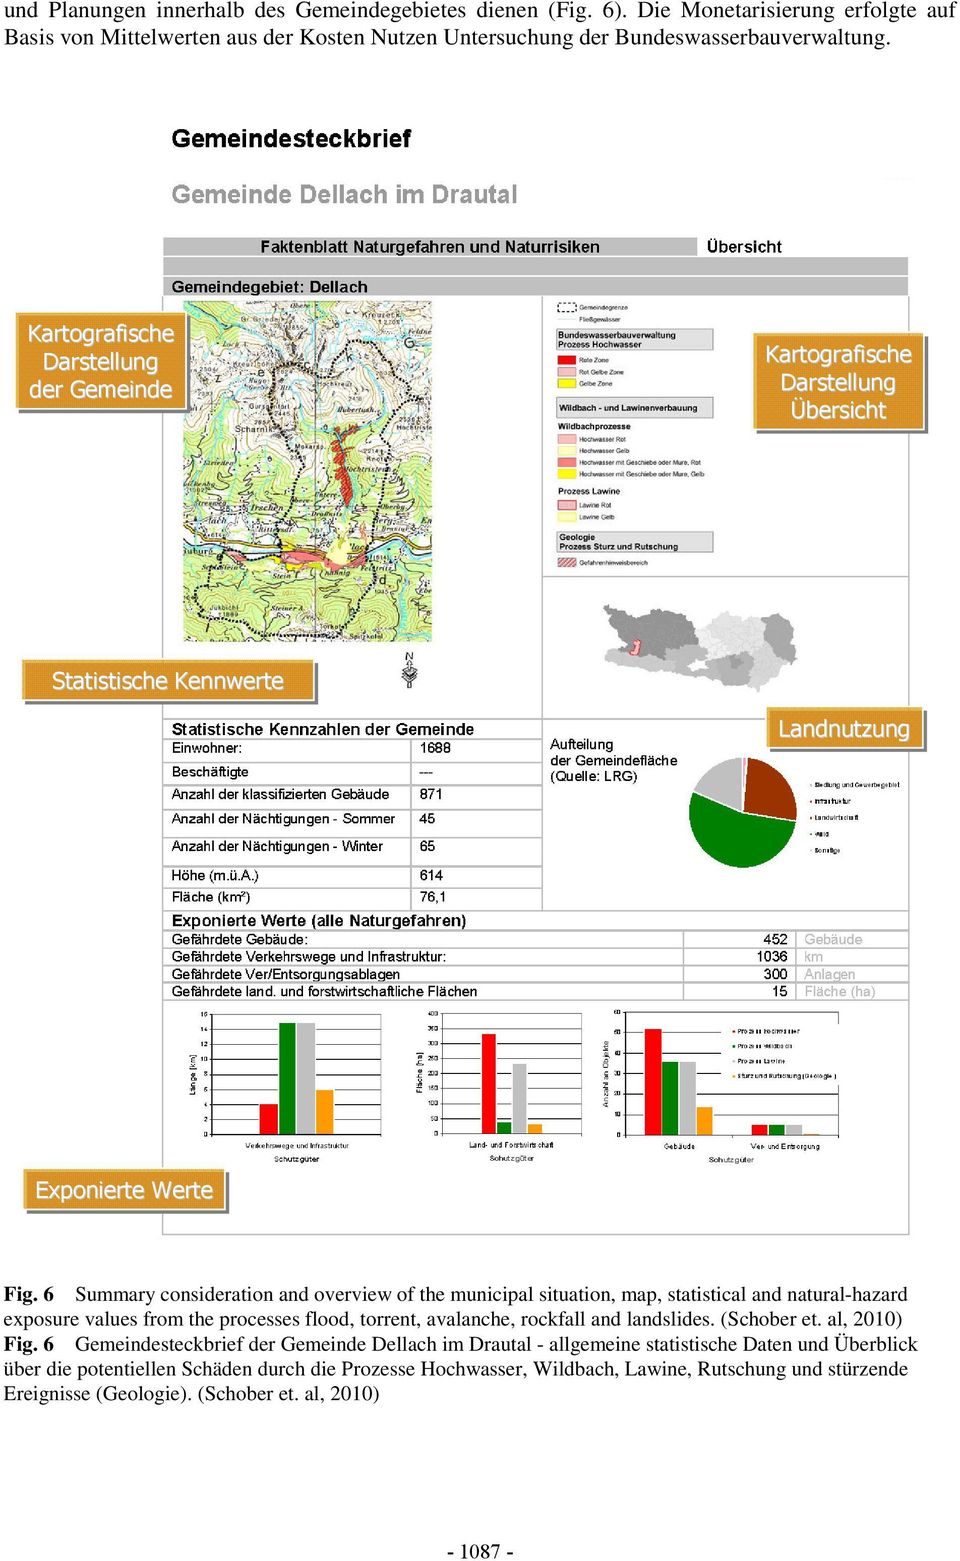 6 Summary consideration and overview of the municipal situation, map, statistical and natural-hazard exposure values from the processes flood, torrent, avalanche, rockfall and landslides.